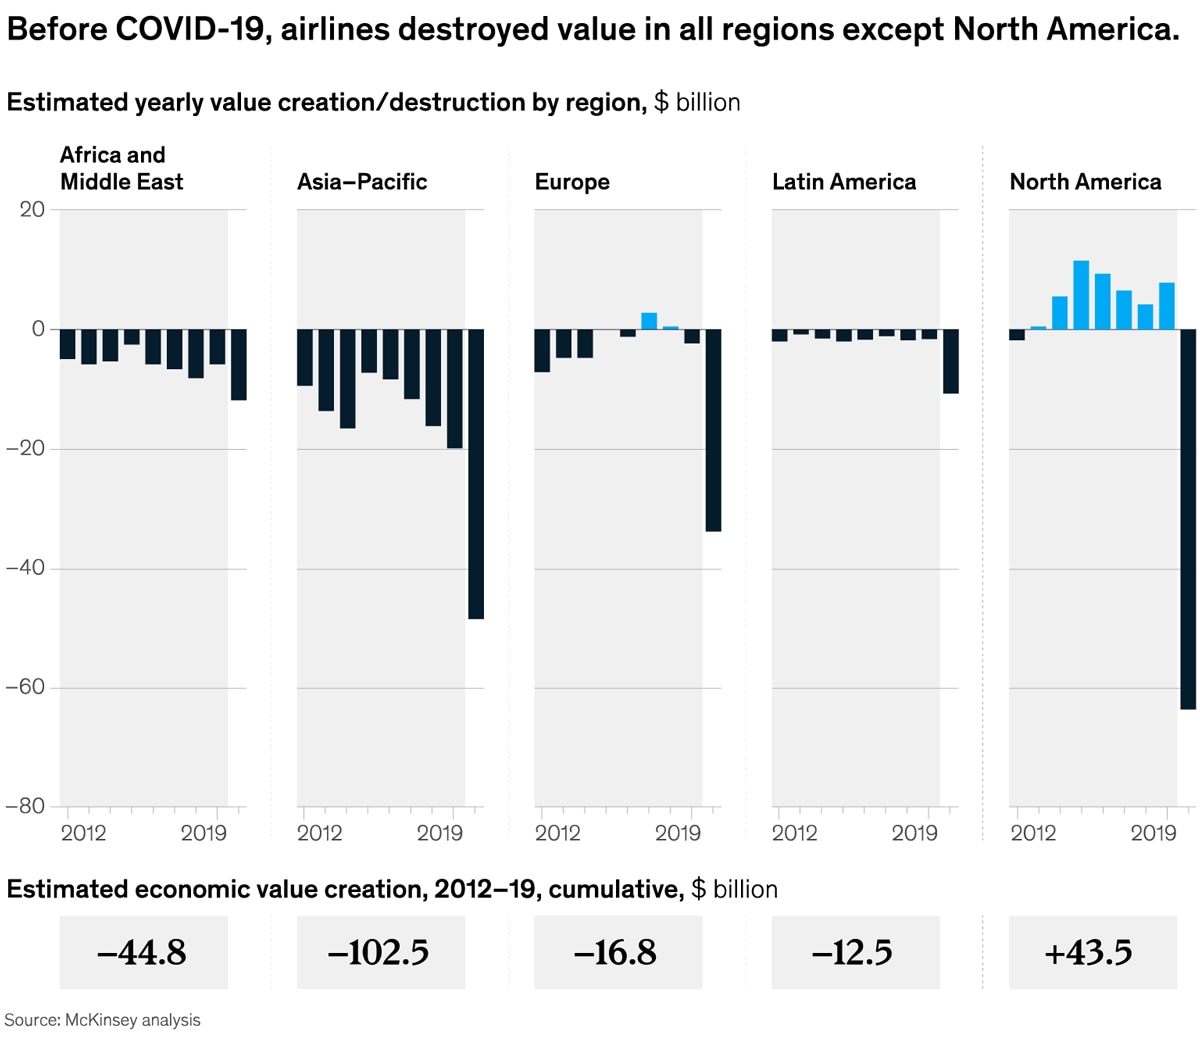 Chart of estimated annual value creation/destruction by airlines, per region